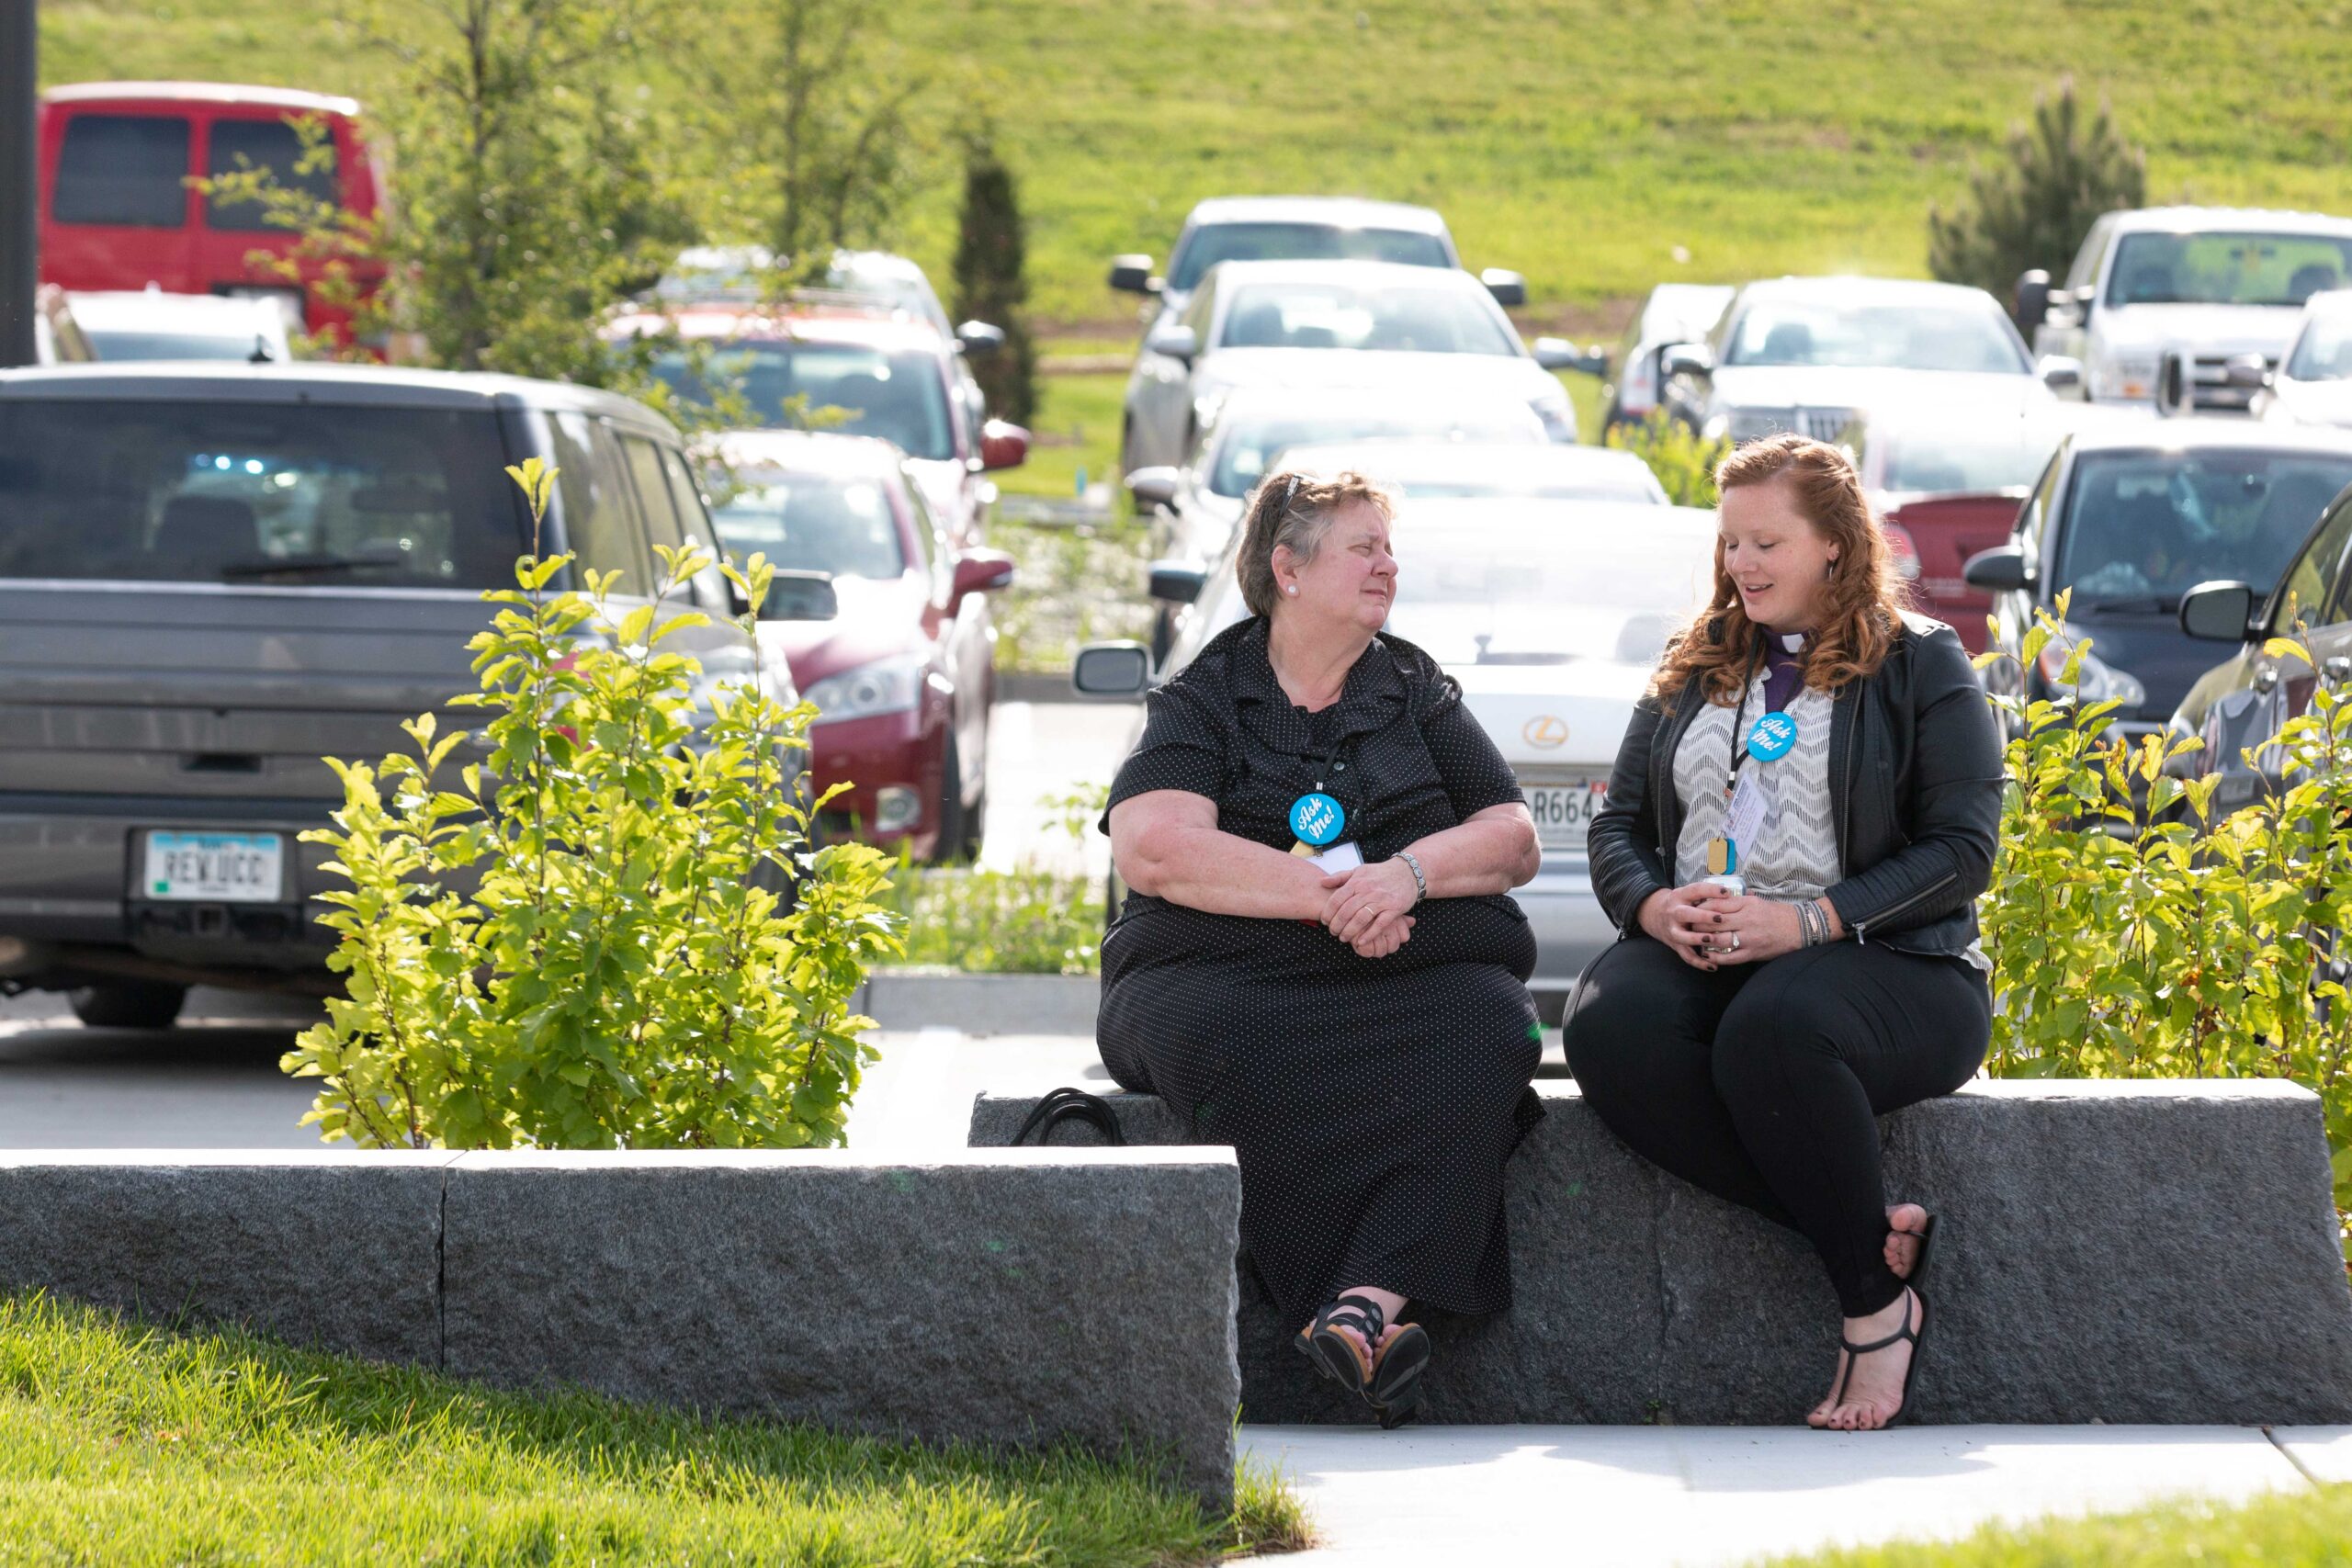 ACM Rev. Samantha Houser and a woman have a discussion outside during Joint Annual Meeting 2019